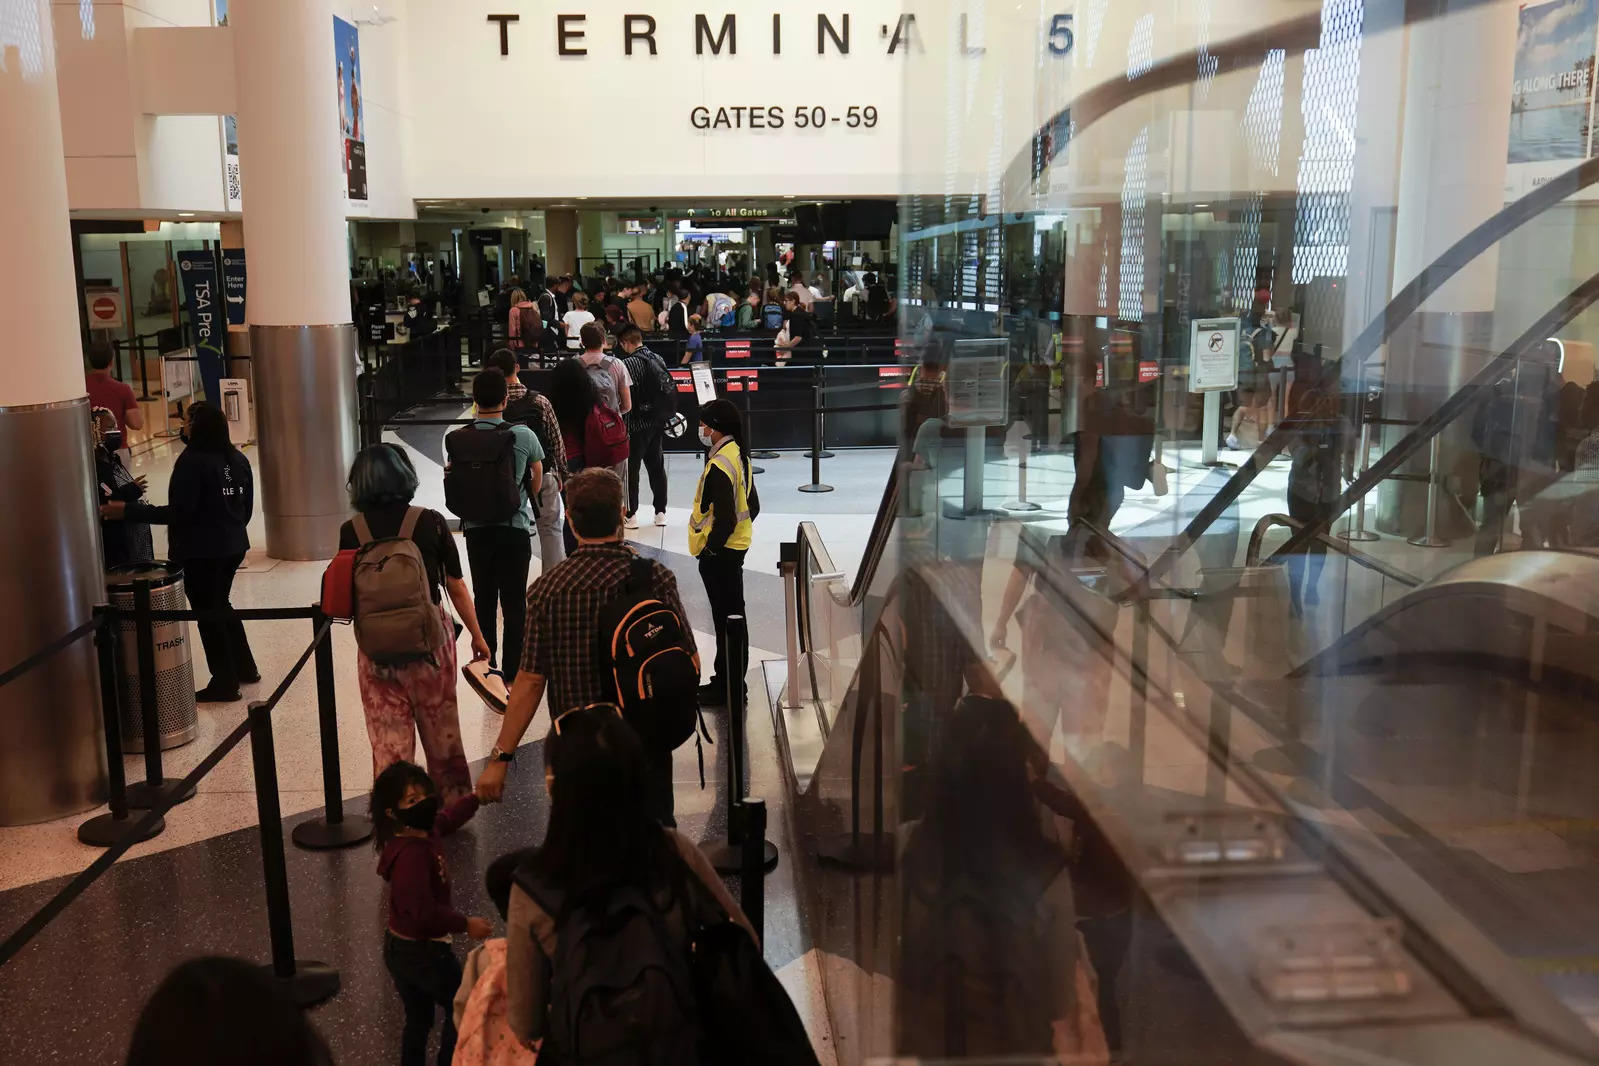   Travelers wait in for a TSA security check at the Los Angeles International Airport in Los Angeles, Friday, July 1, 2022. The July Fourth holiday weekend is off to a booming start with airport crowds crushing the numbers seen in 2019, before the pandemic.  (AP Photo/Jae C. Hong)